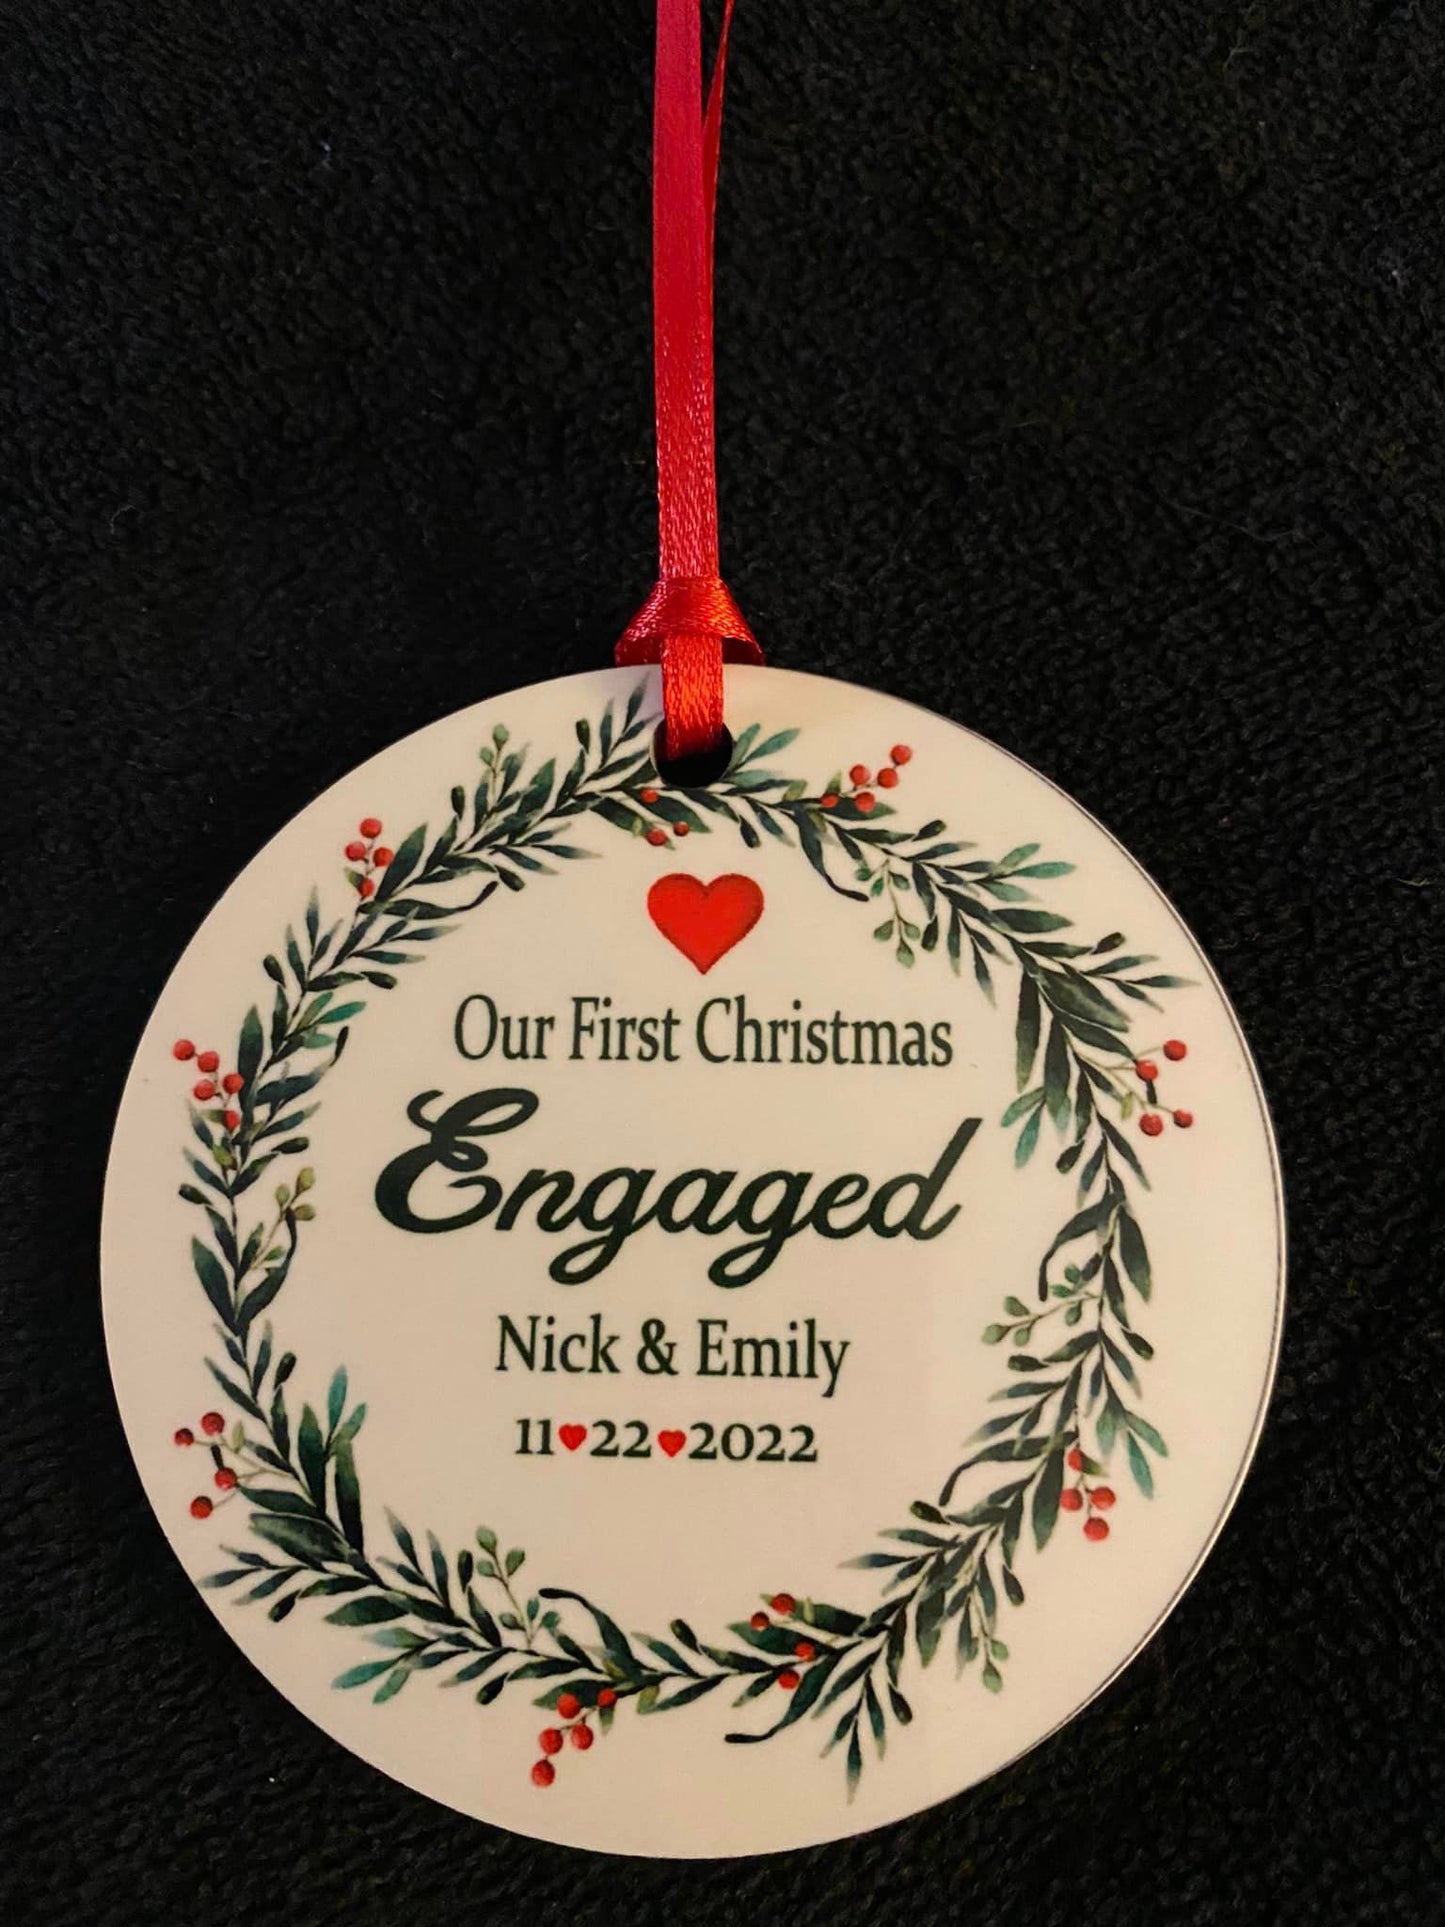 Our First Christmas Engaged